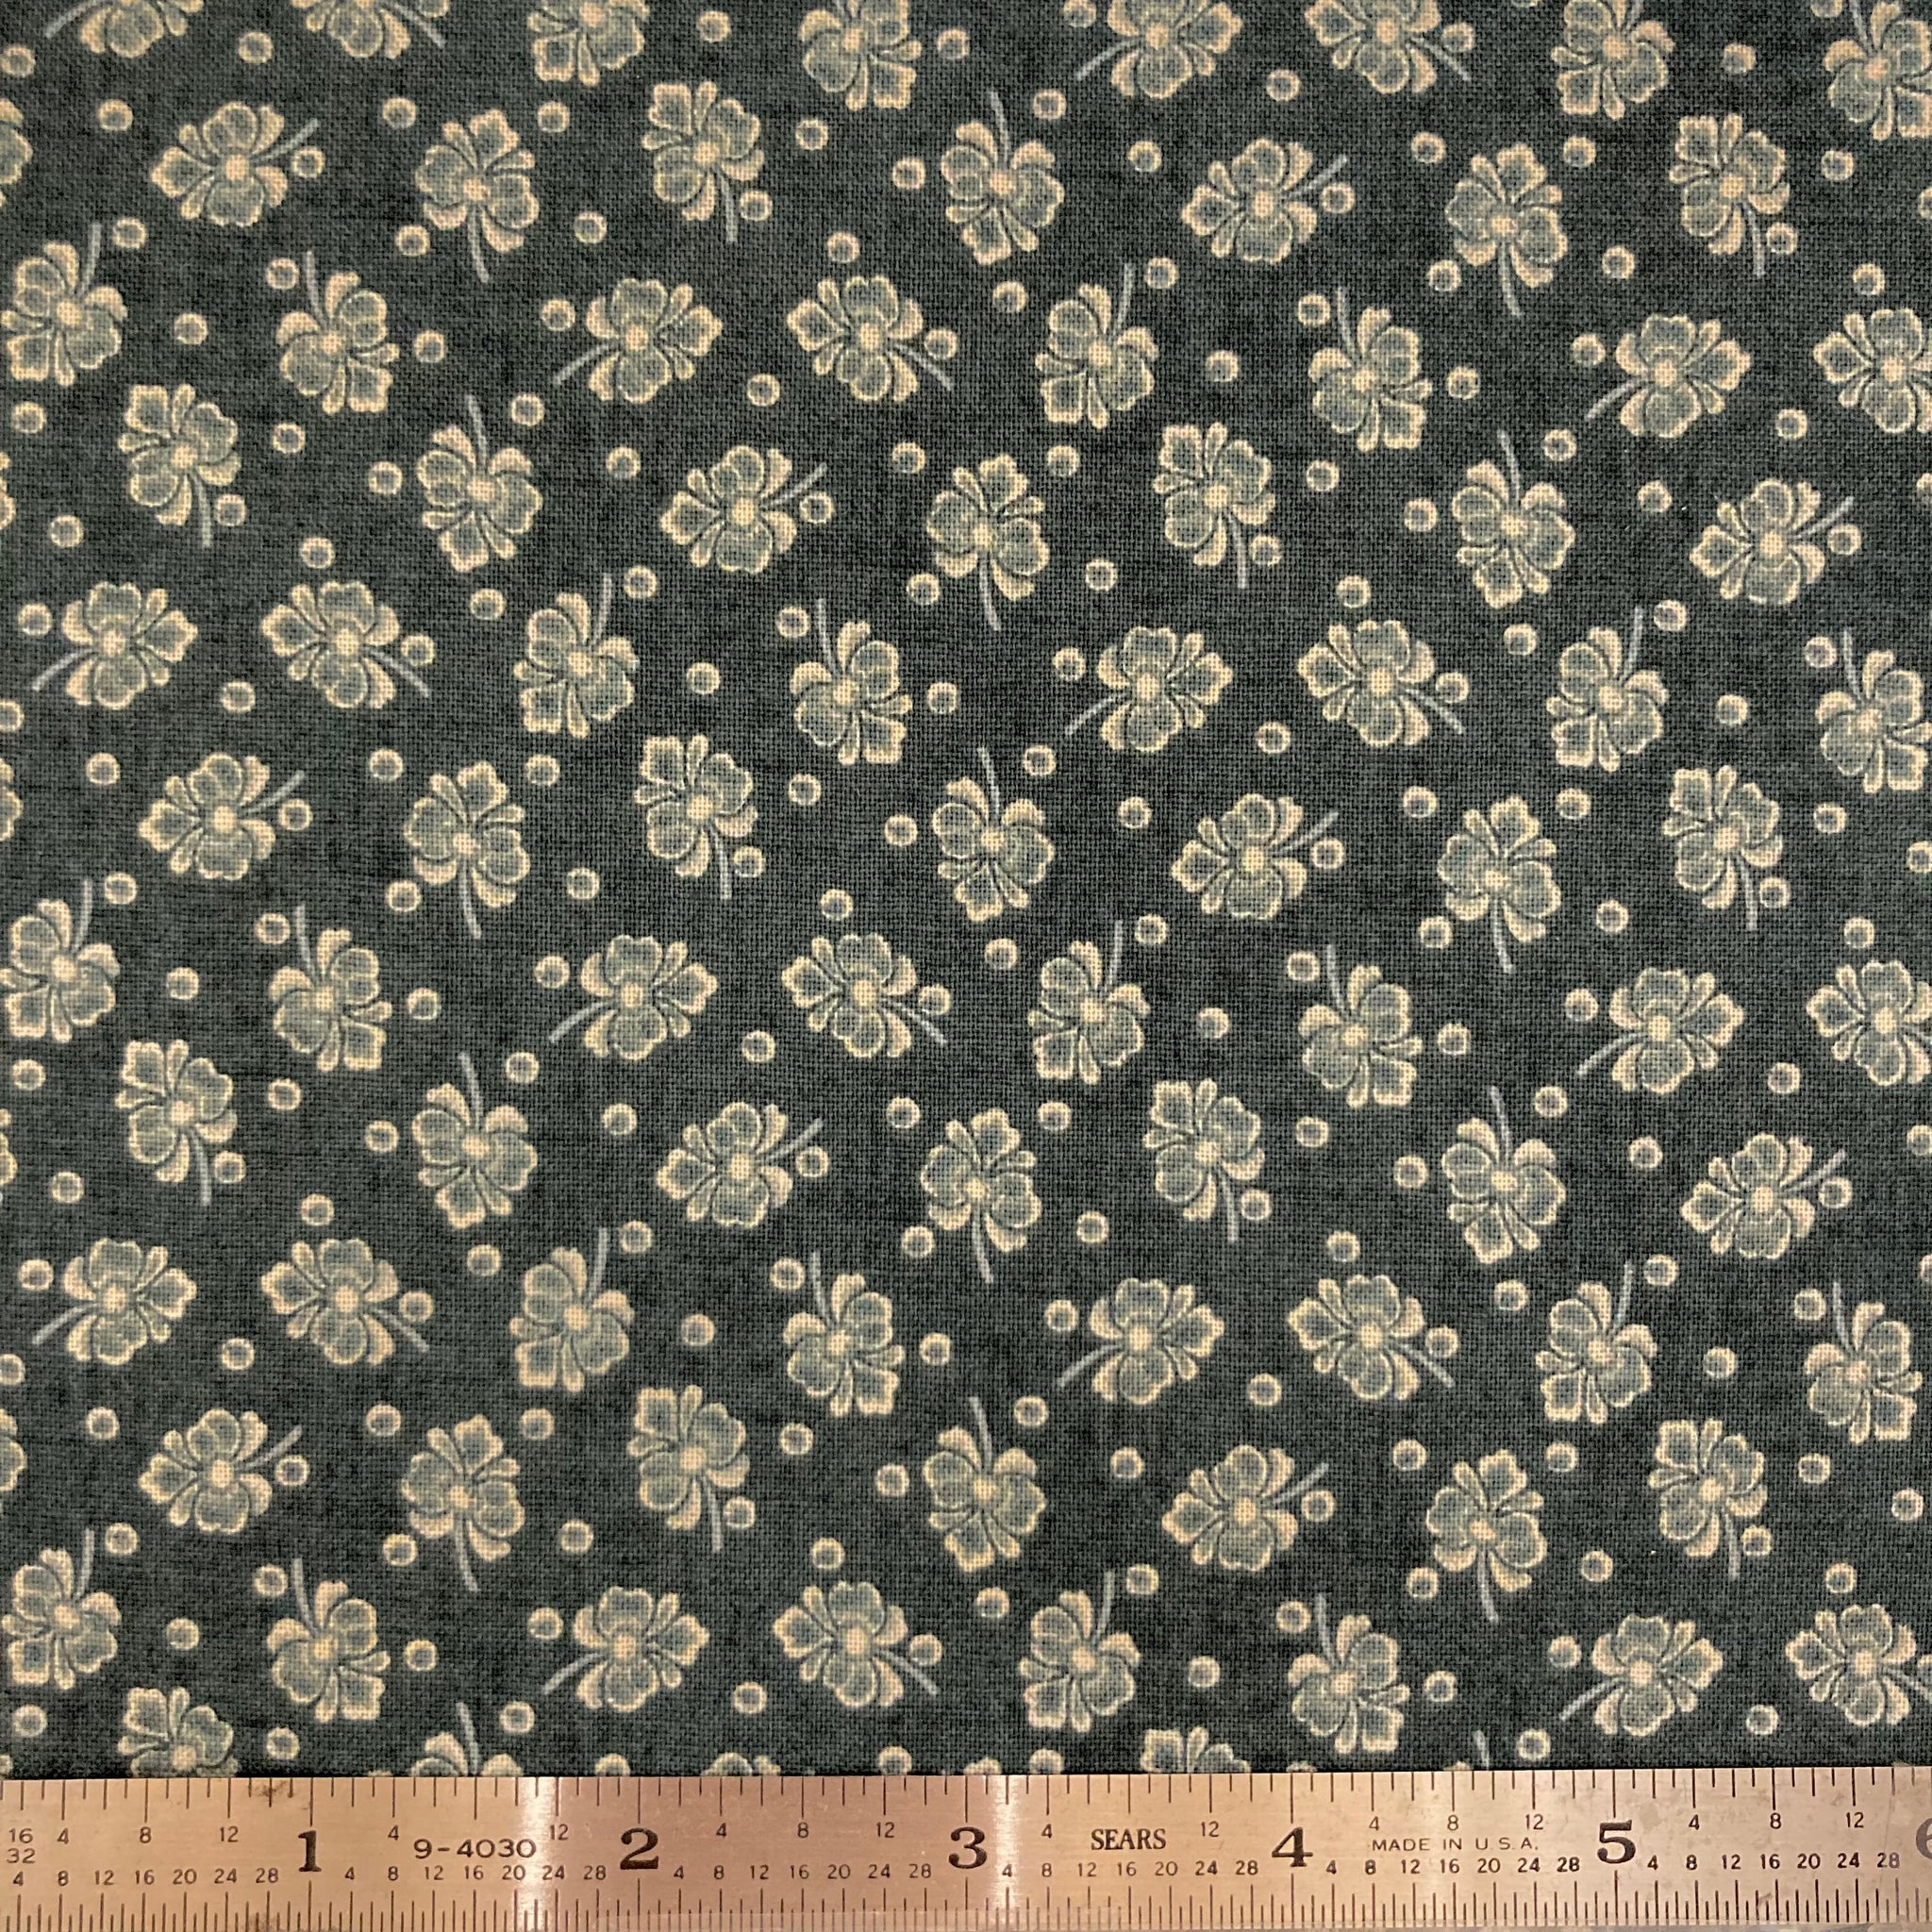 Old Fashioned Floral - Teal